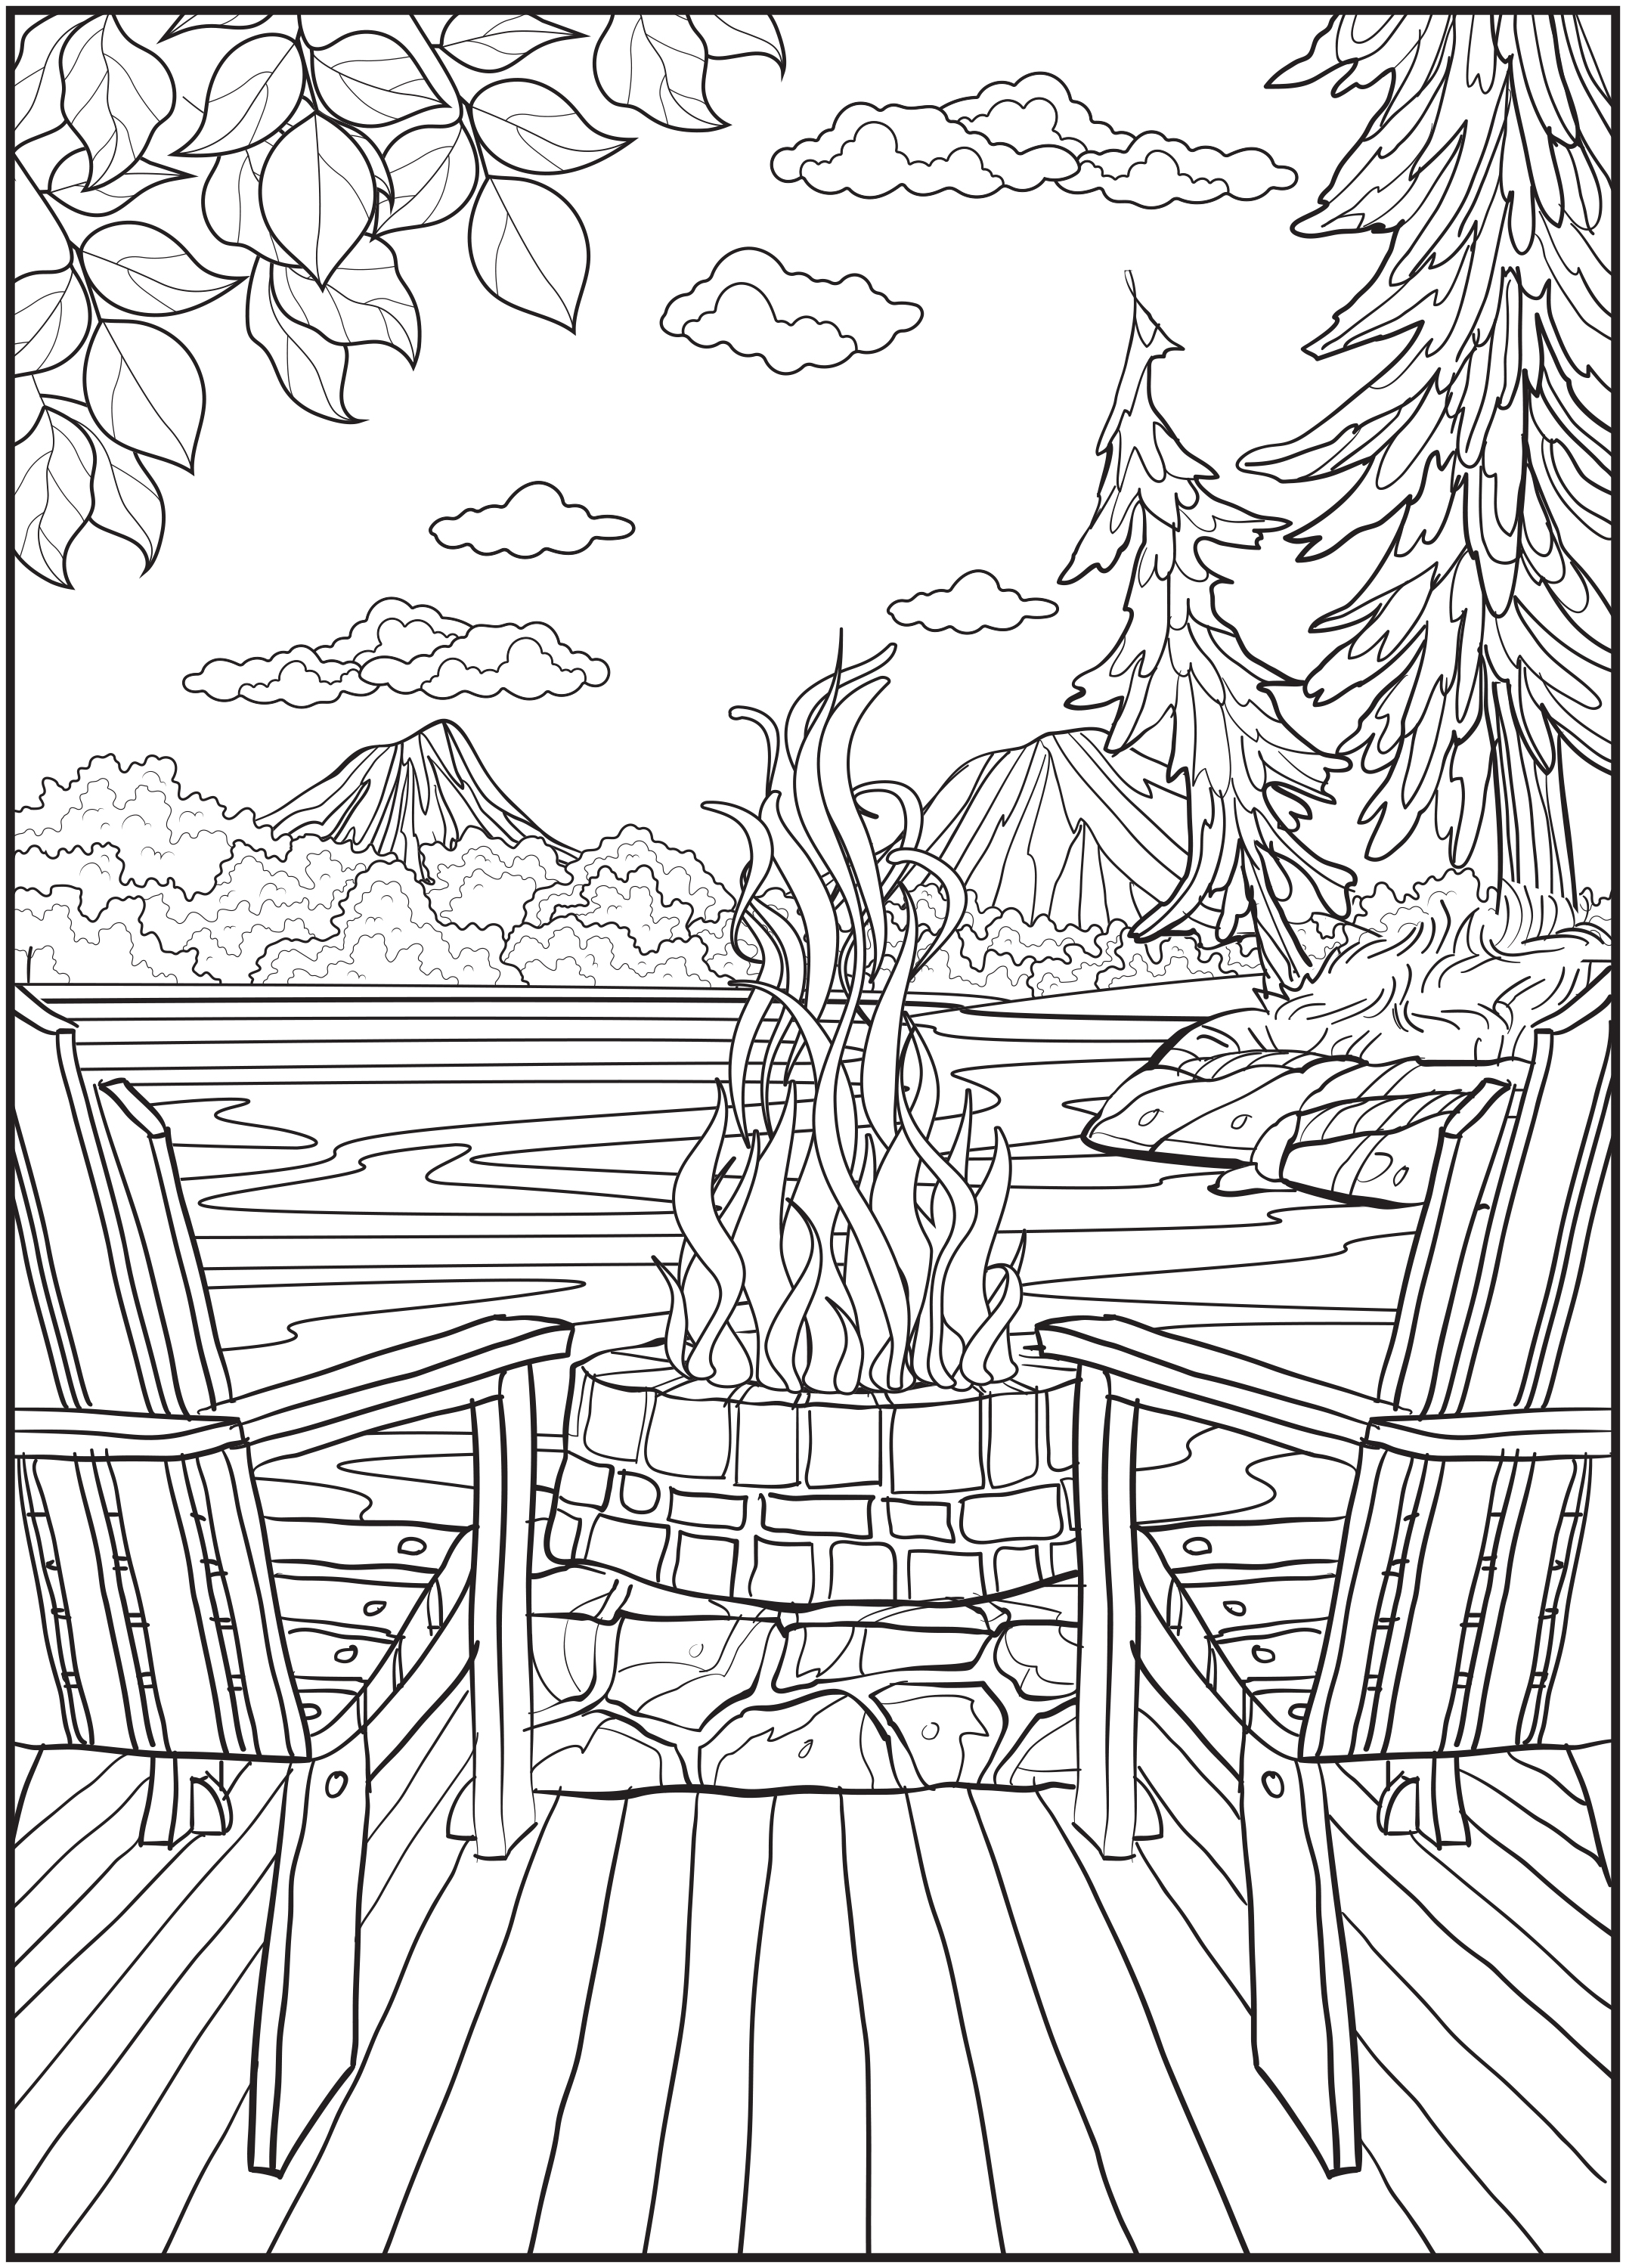 Cra-Z-Art Timeless Creations Adult Coloring Book, Nature's Escape